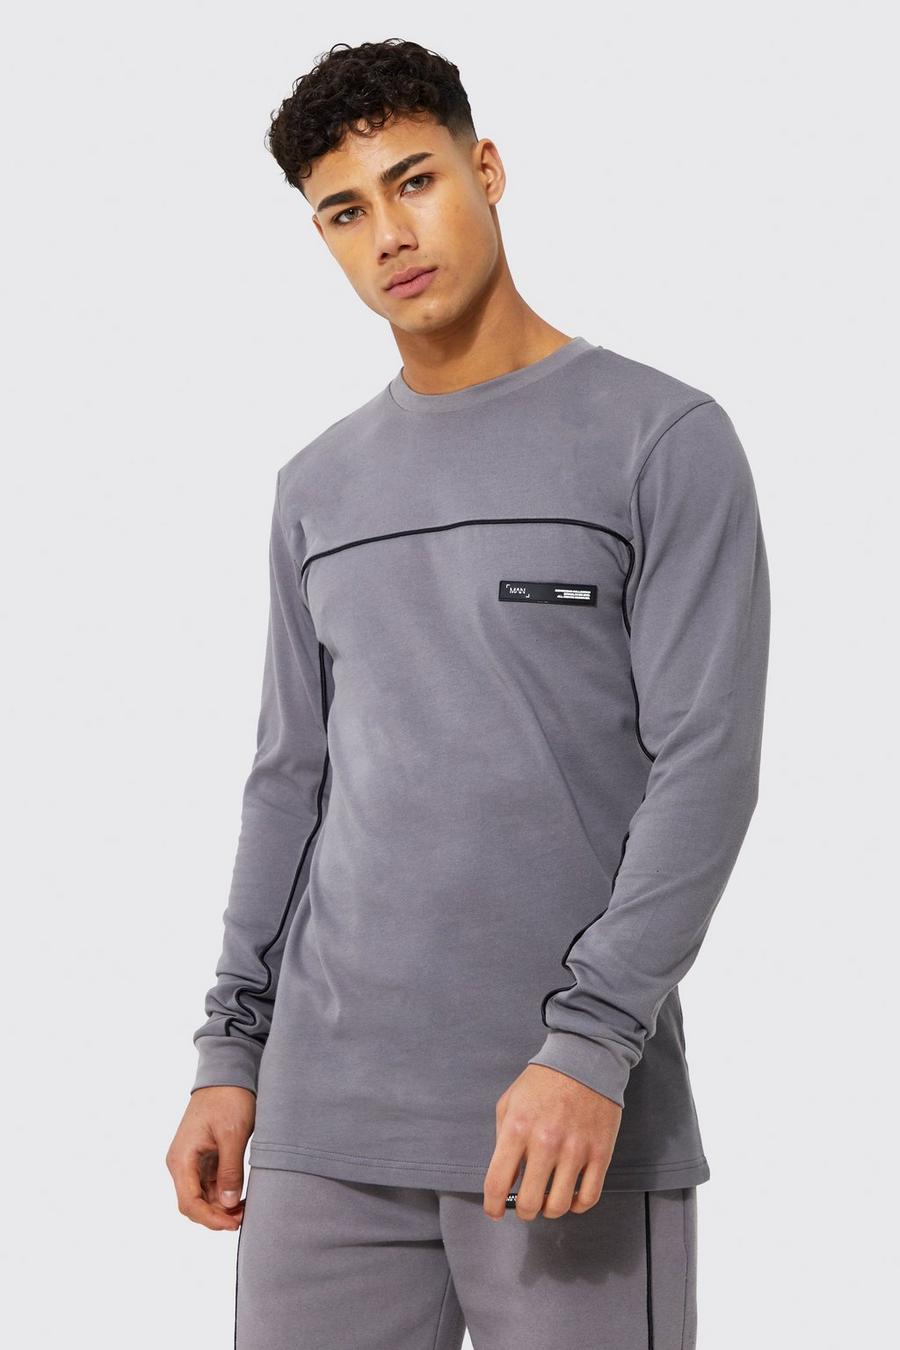 Charcoal grigio Slim Fit Long Sleeve T-shirt Piping